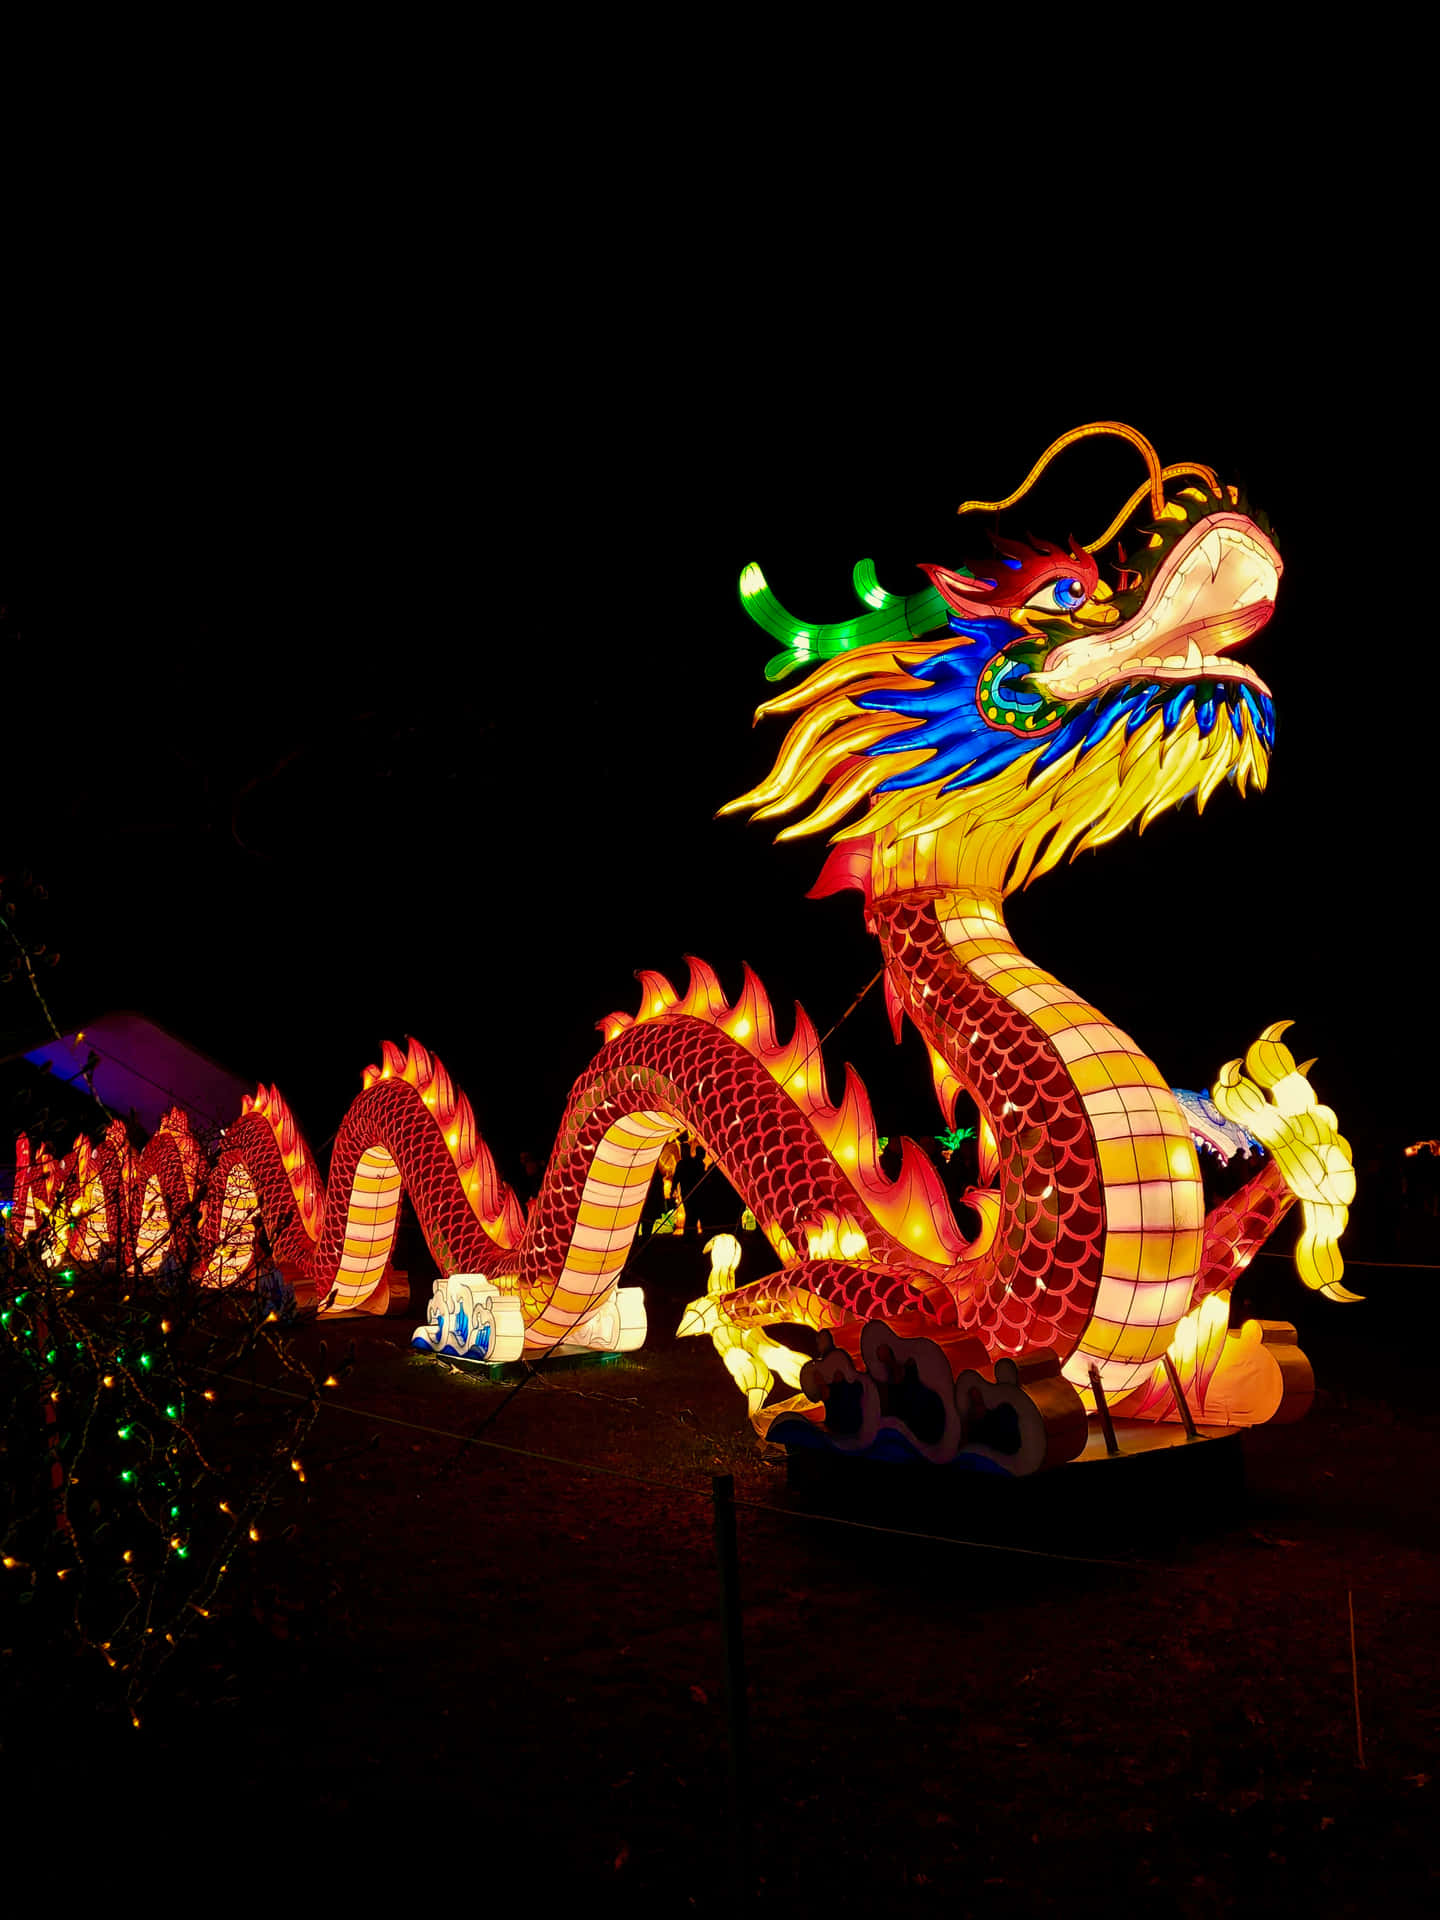 Incredible Fire Breathing Dragon